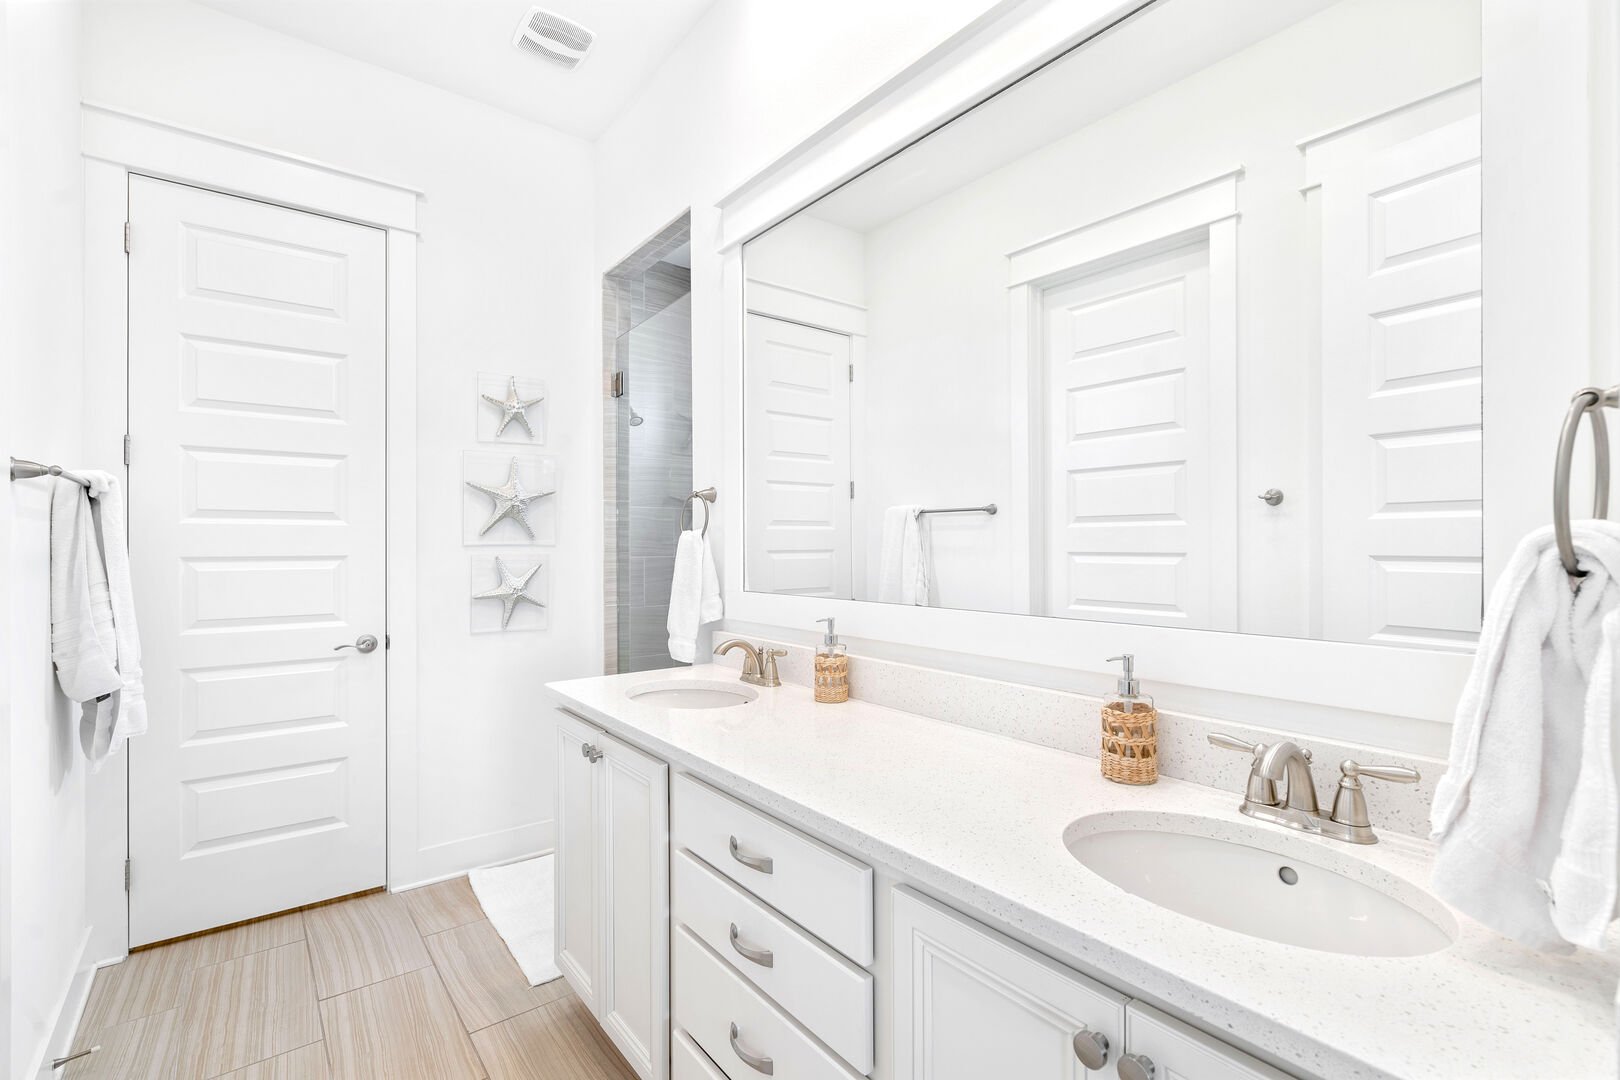 Primary bathroom features a large walk-in closet and large shower